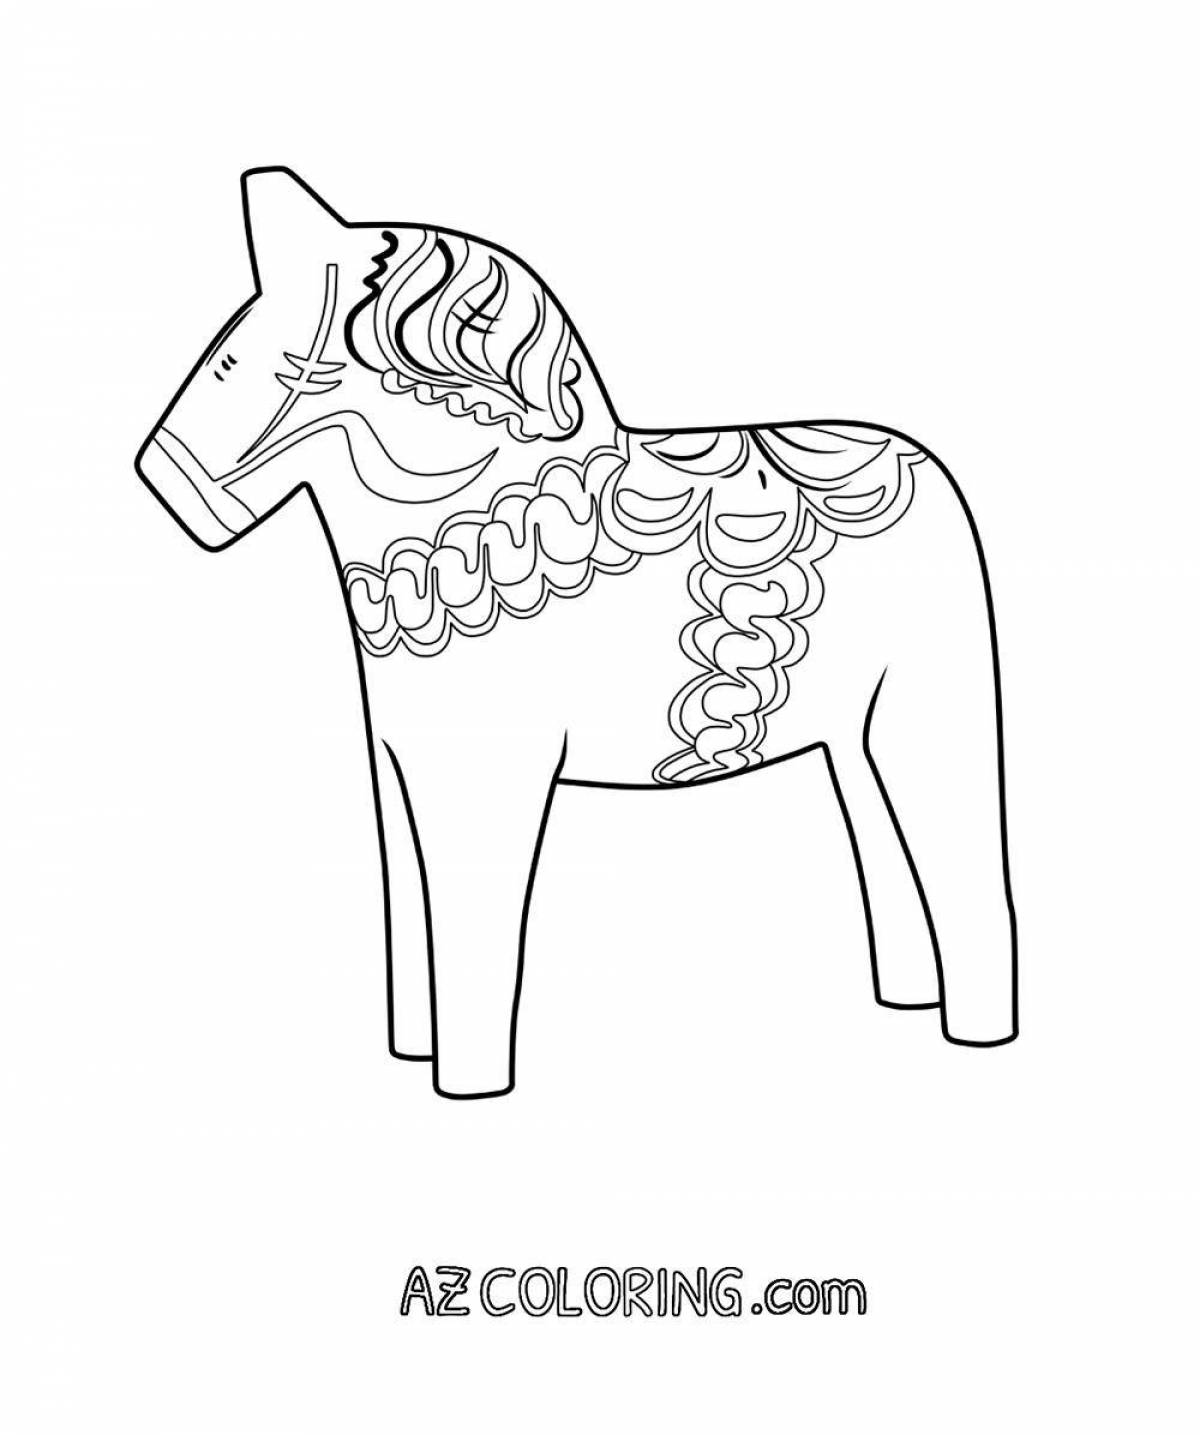 Exciting Gorodets horse coloring book